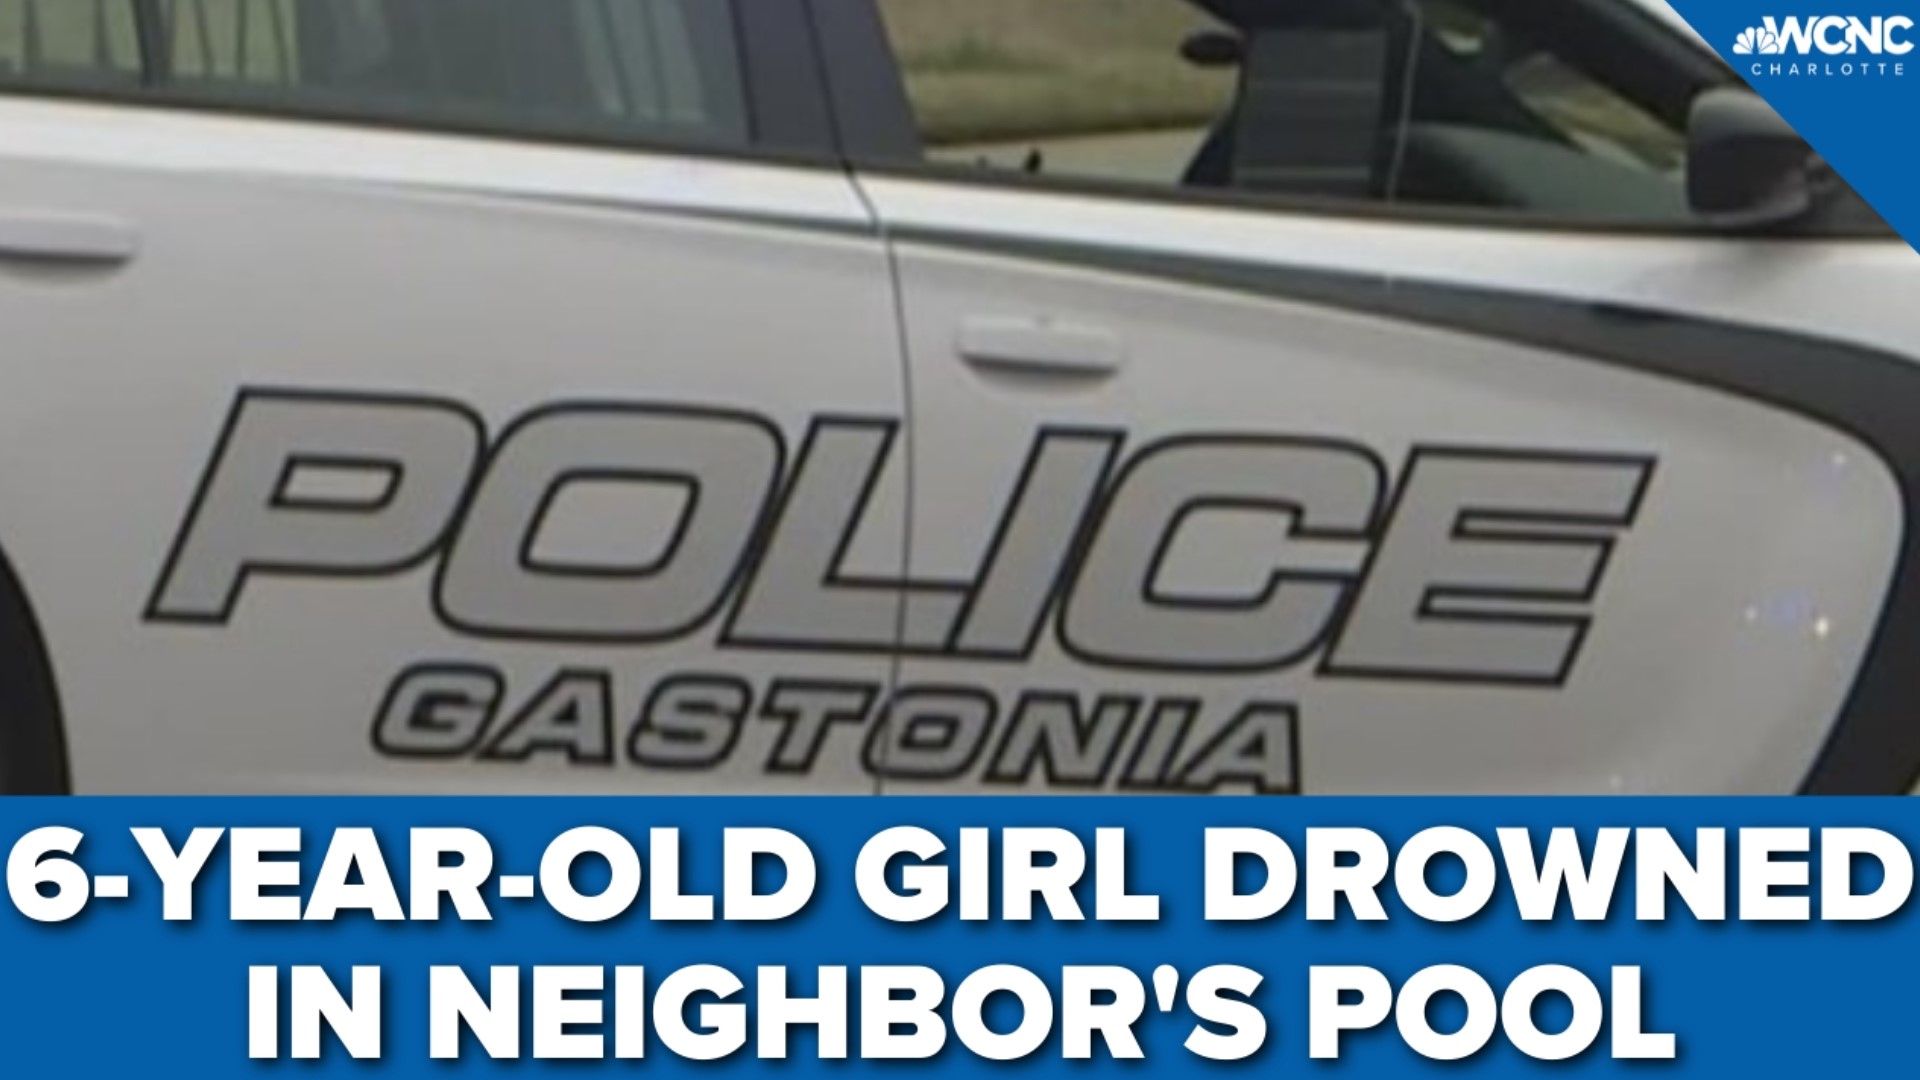 Gastonia Police say a 6-year-old girl drowned in a neighbor's pool this weekend.